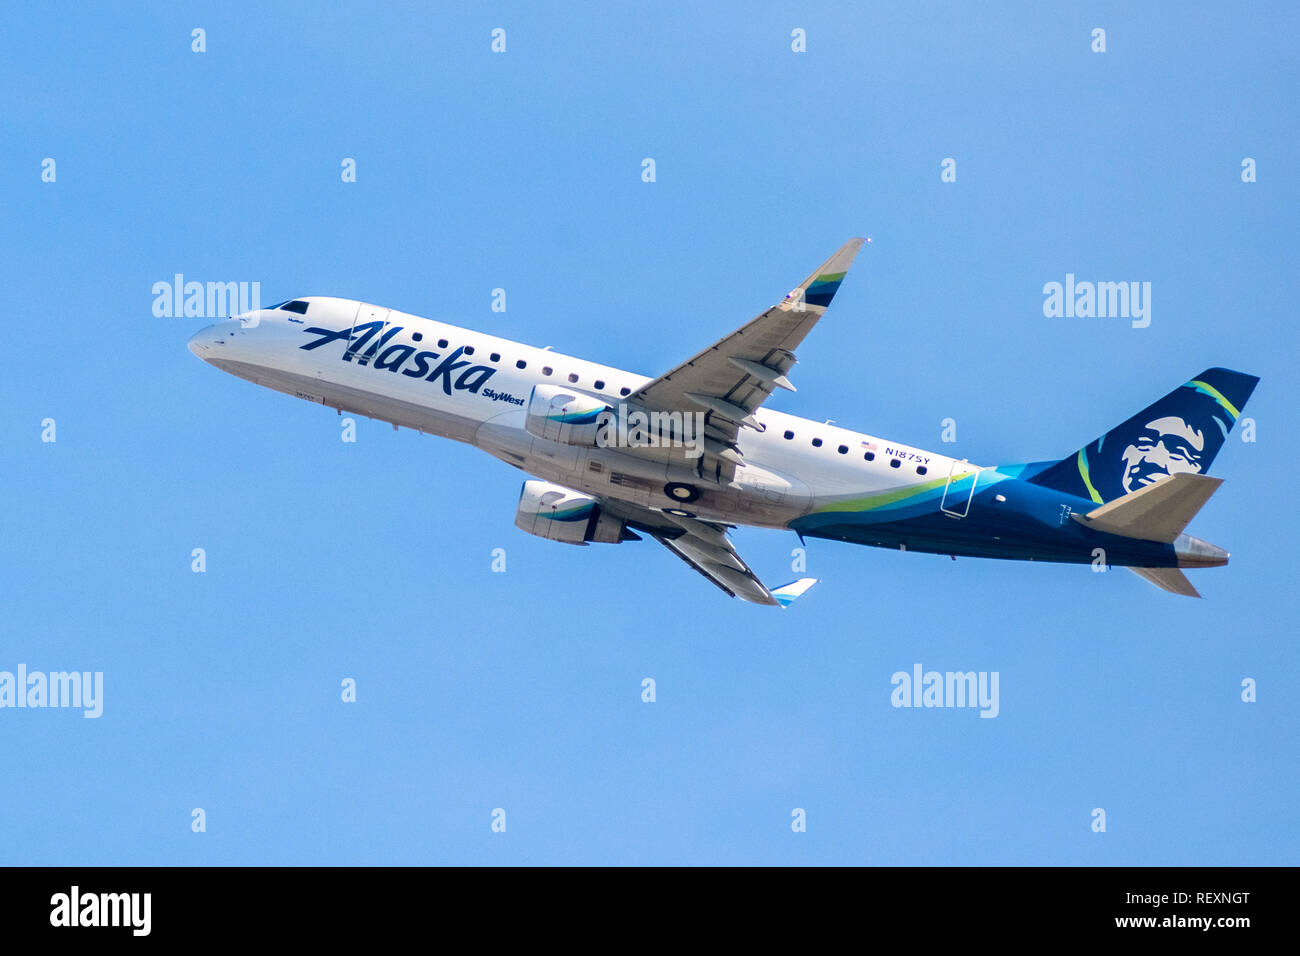 January 31, 2018 San Jose / CA / USA - Alaska Airlines aircraft up in the air after taking off from Norman Y. Mineta San Jose International Airport, S Stock Photo